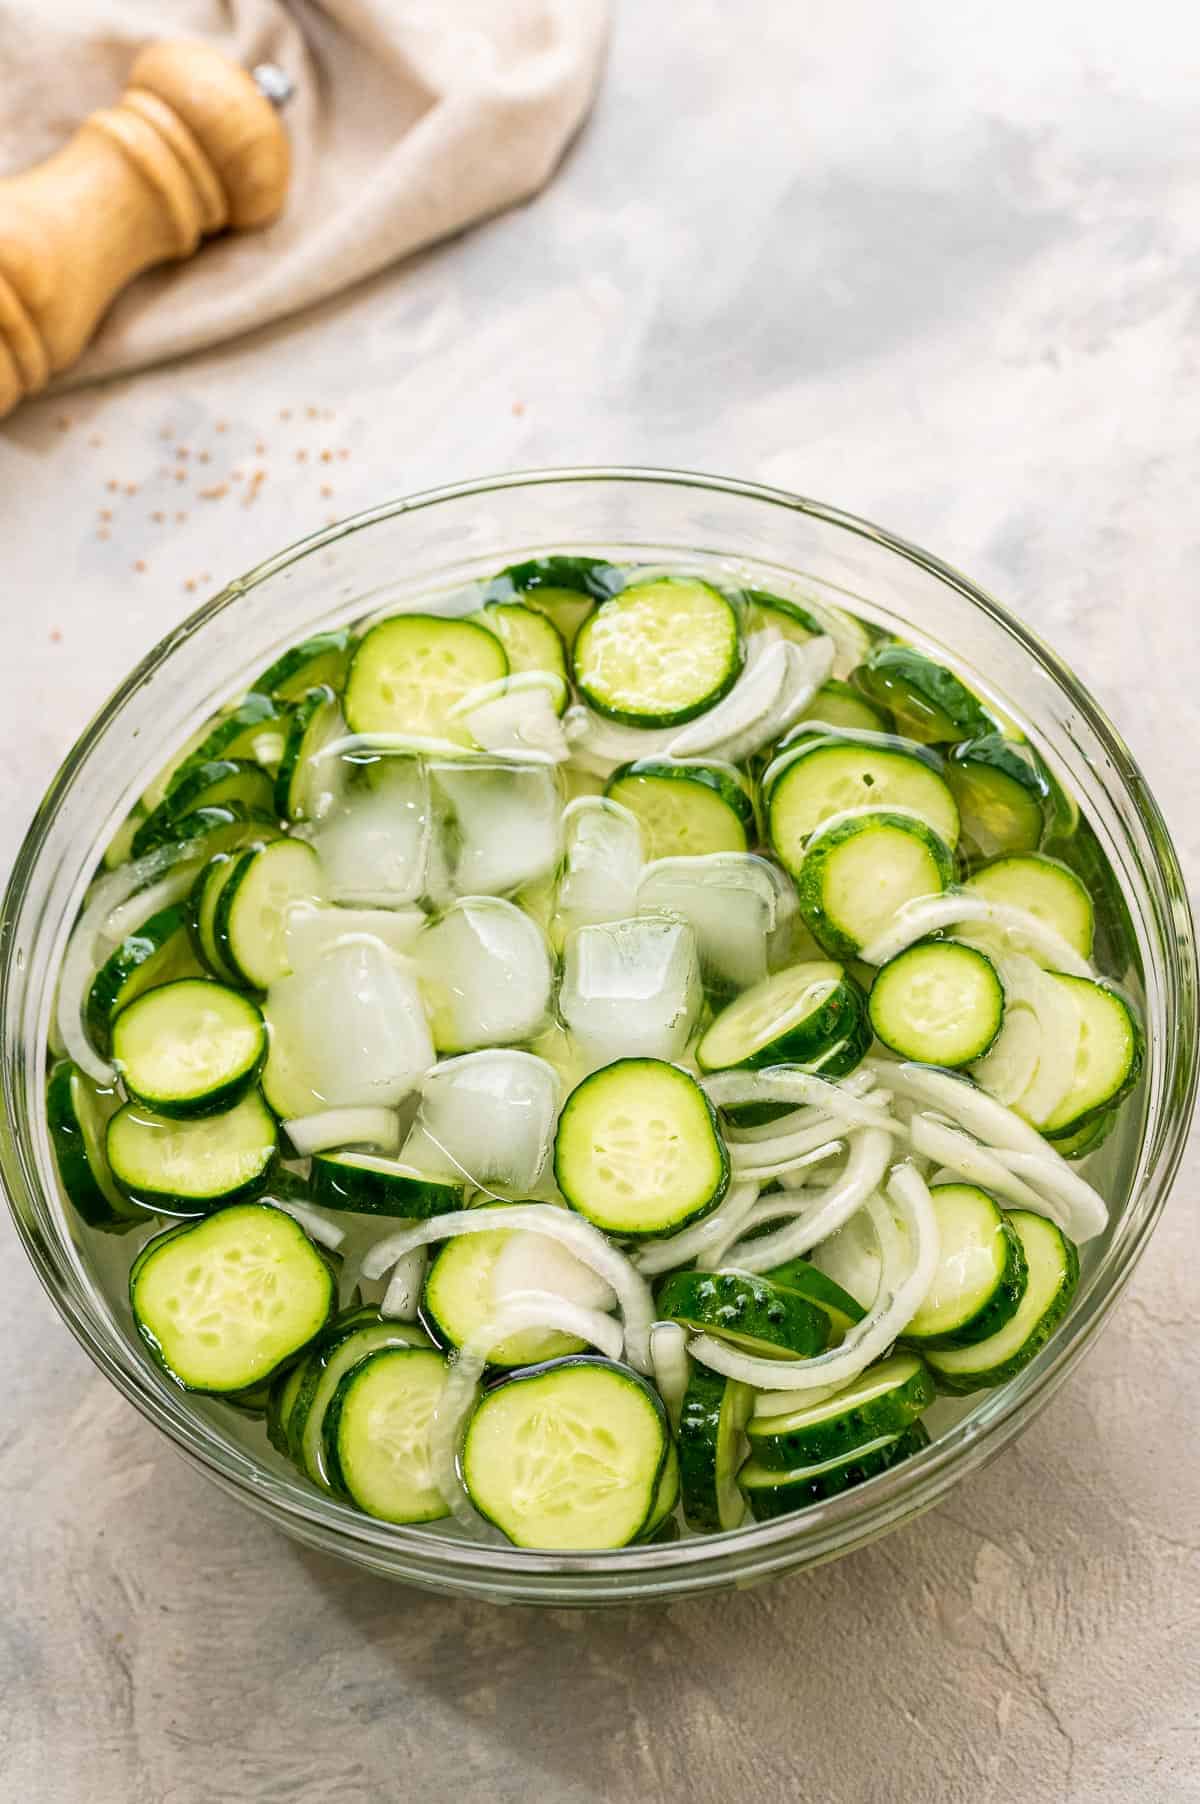 Glass bowl with cucumbers, ice and onions